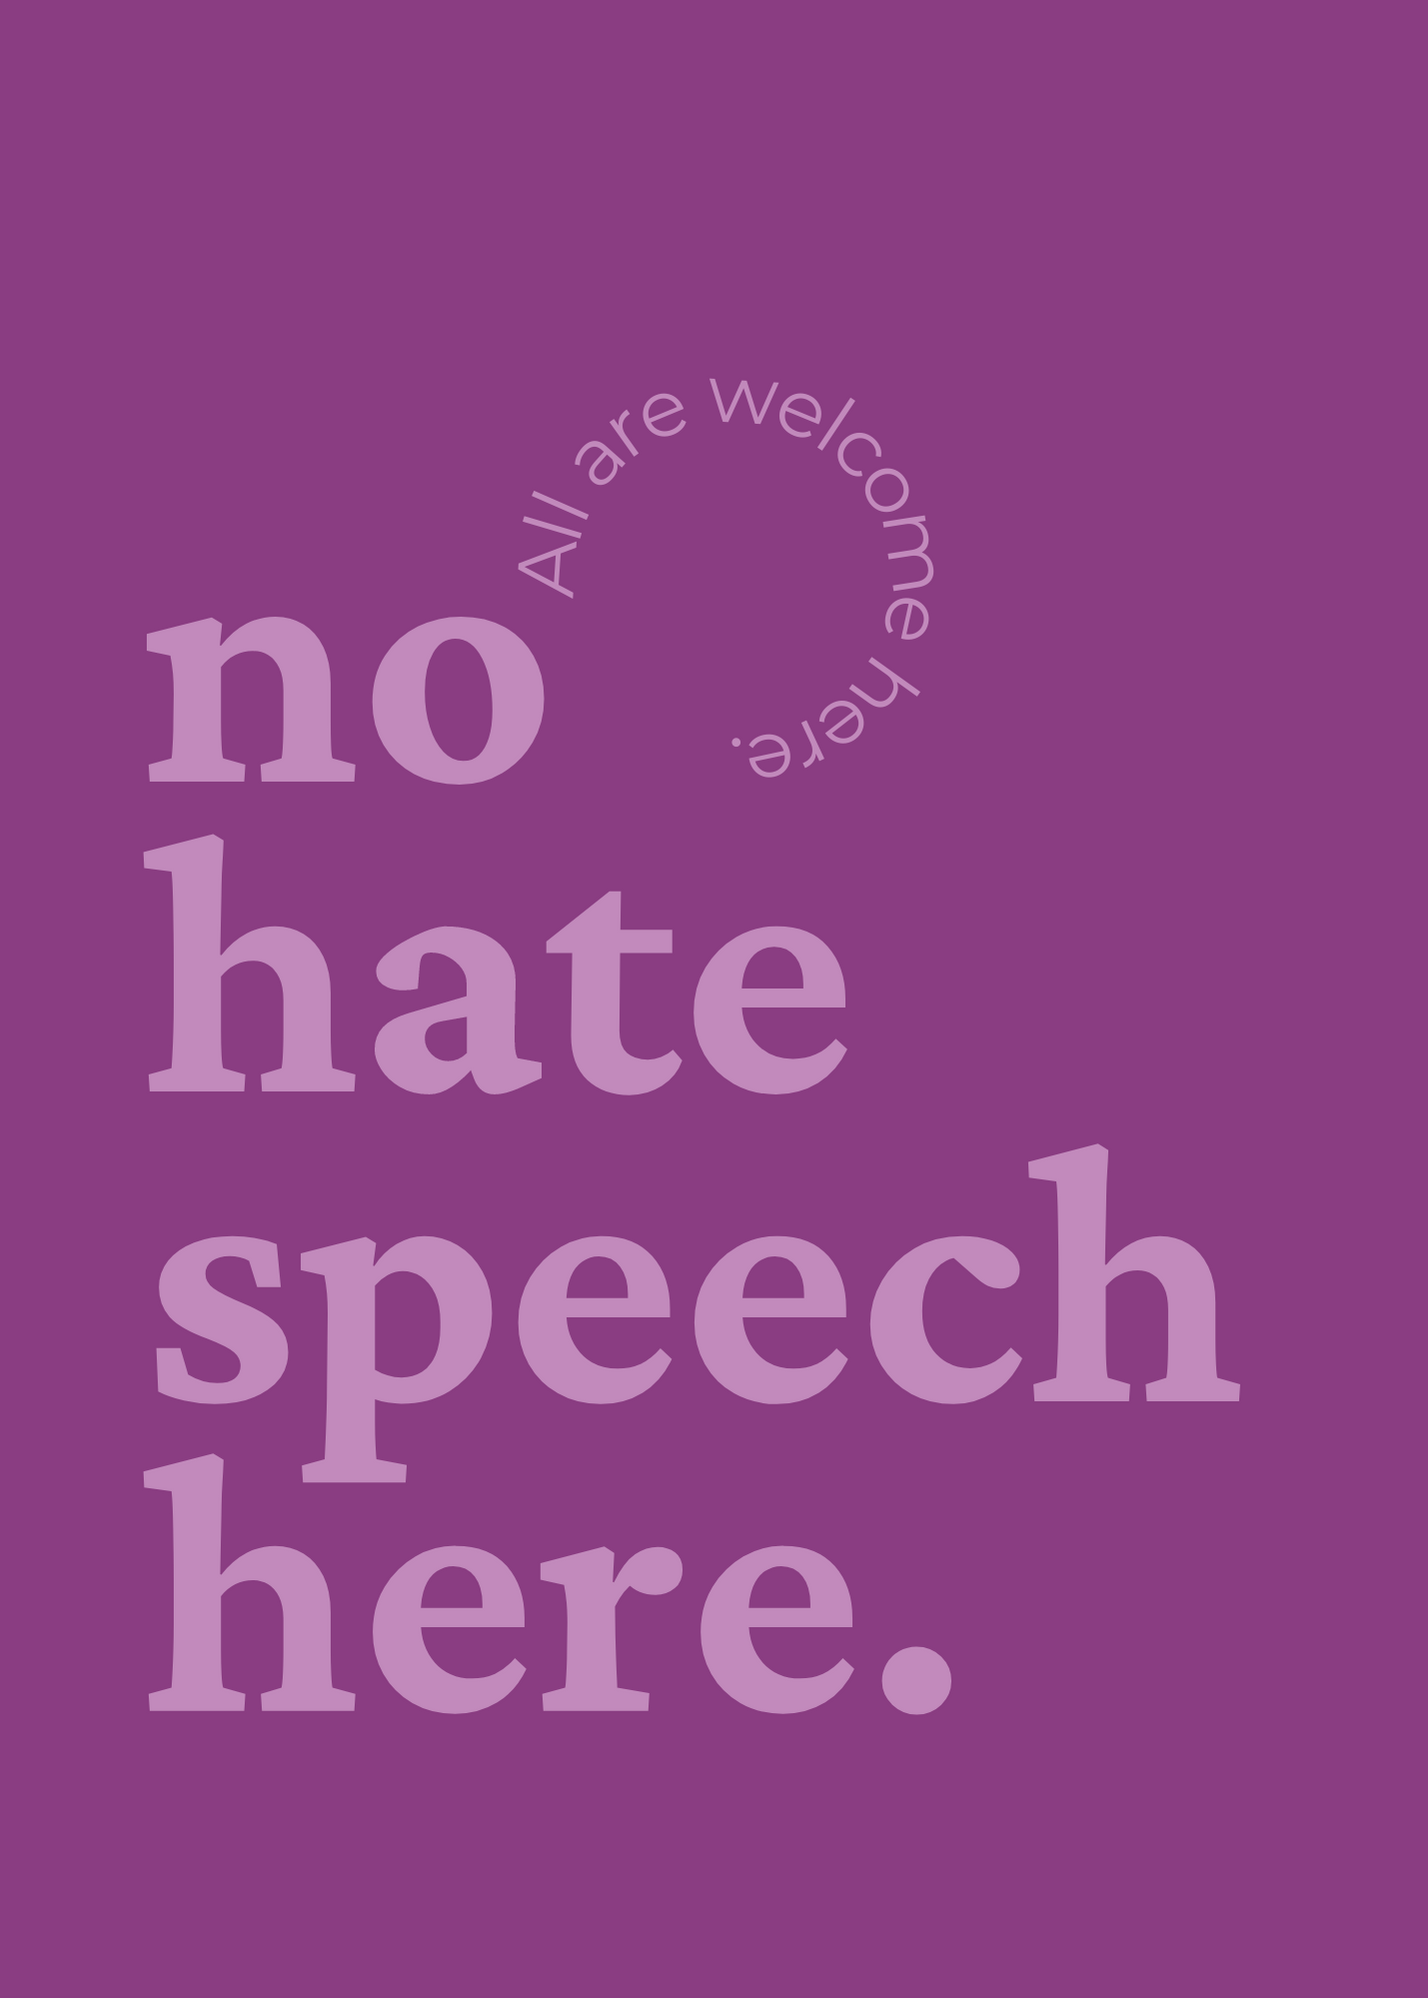 no hate speech here. -  5x7 Printable Multiple Colors